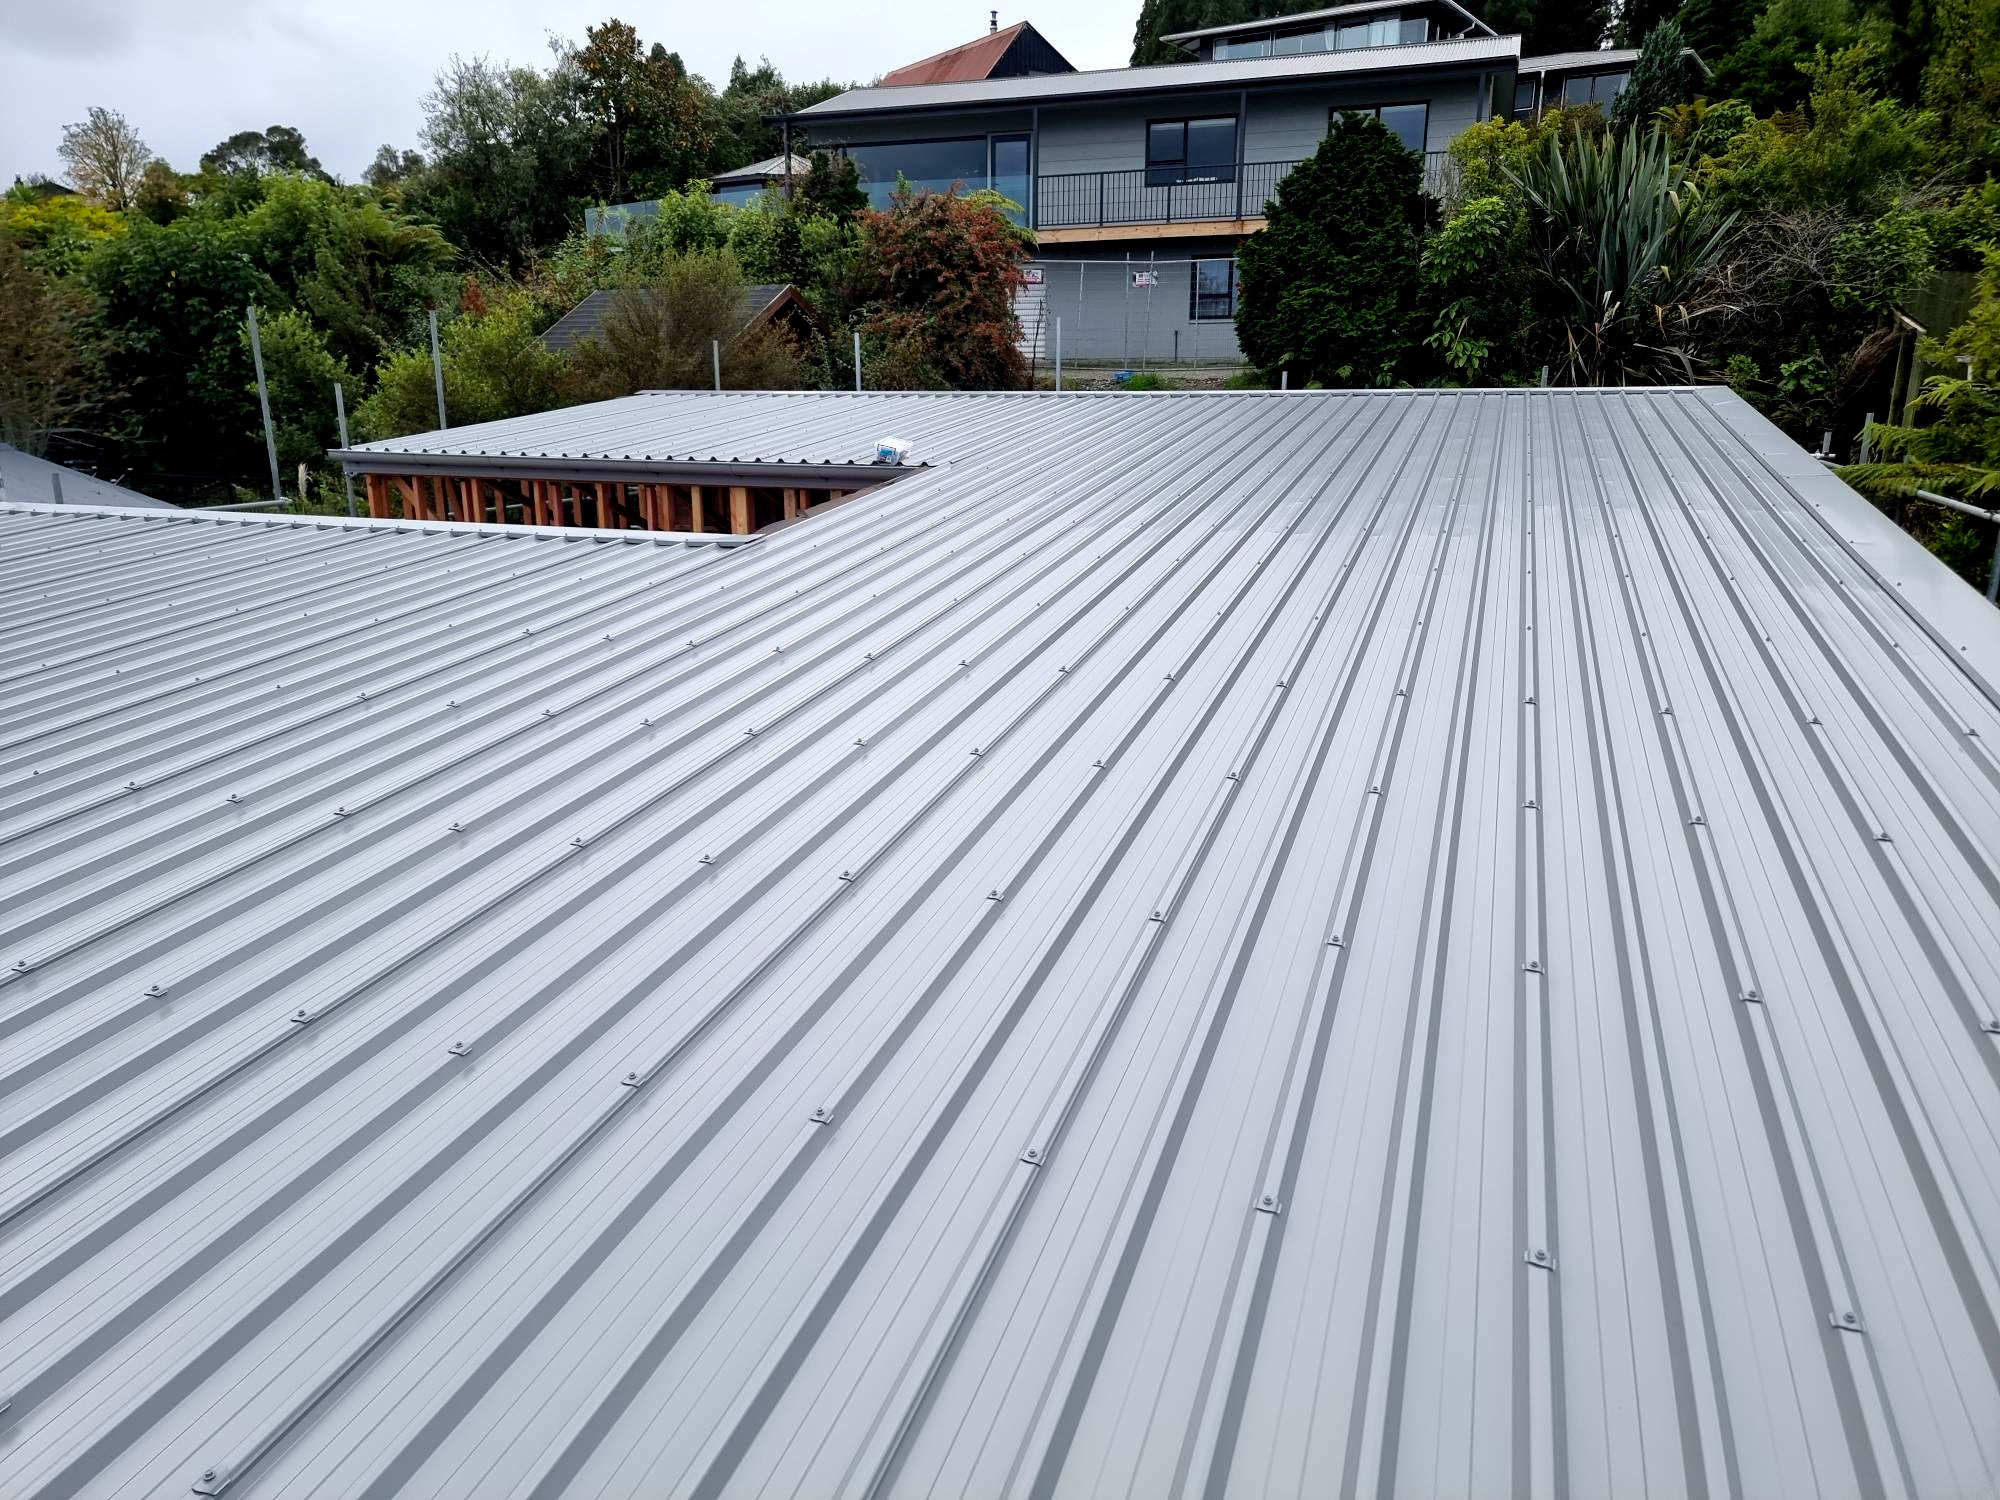 Long run steel makes great roofing material